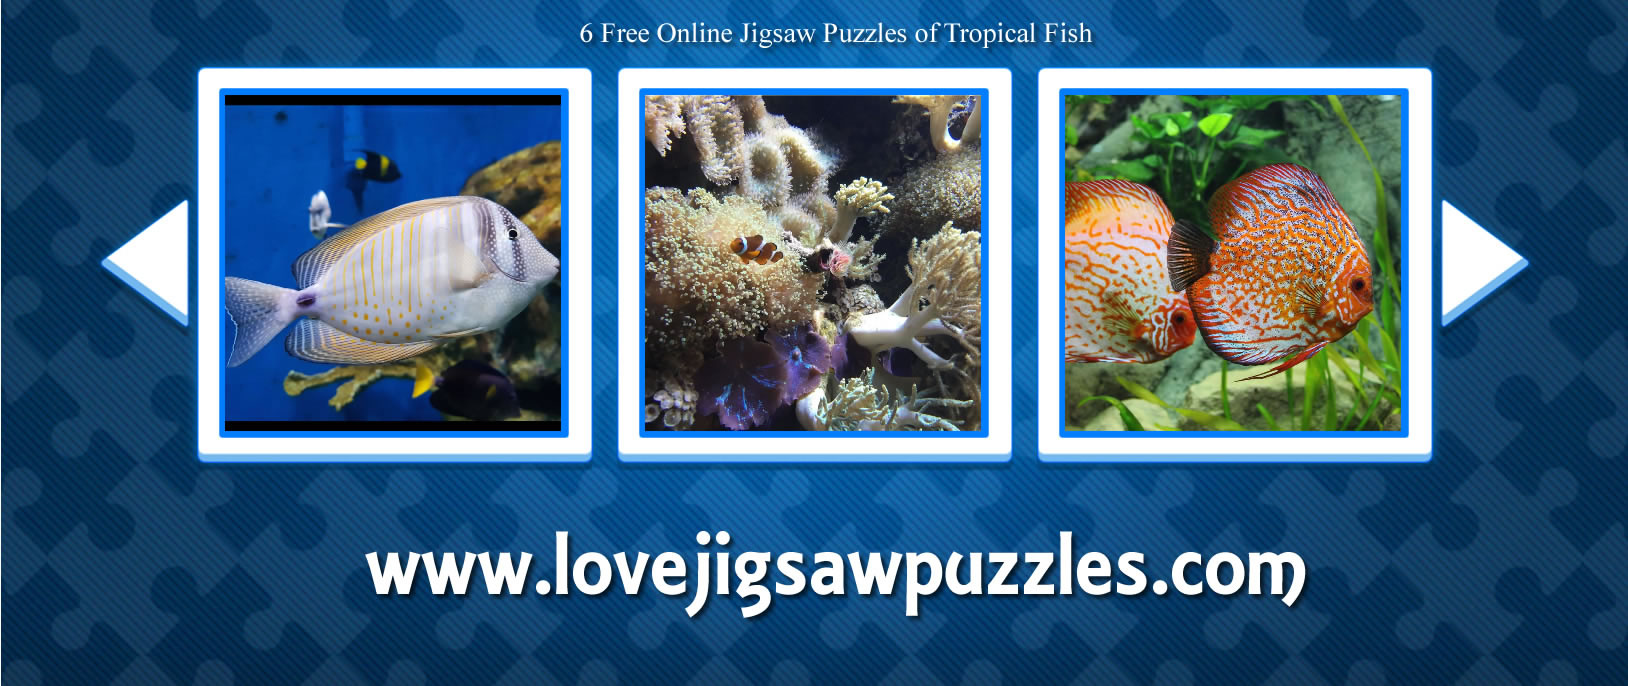 jigsaw puzzles of tropical fish